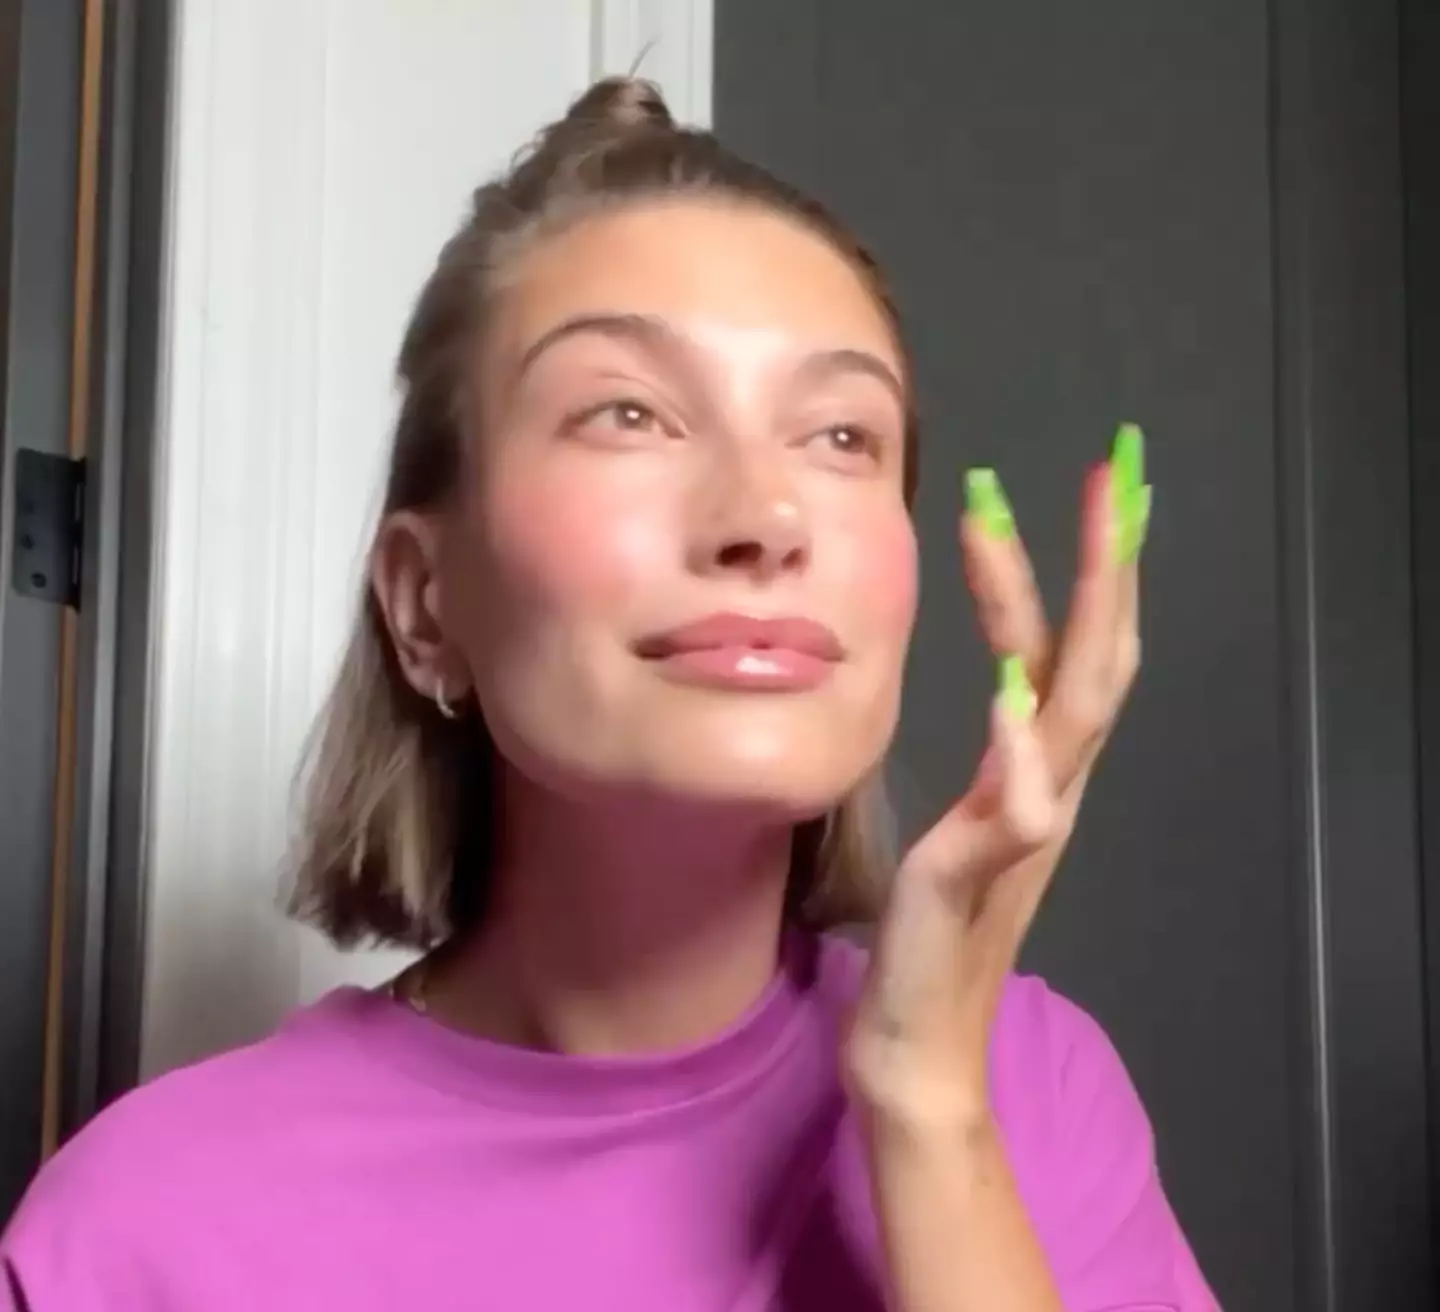 Hailey's skincare brand is designed to be 'simple'.